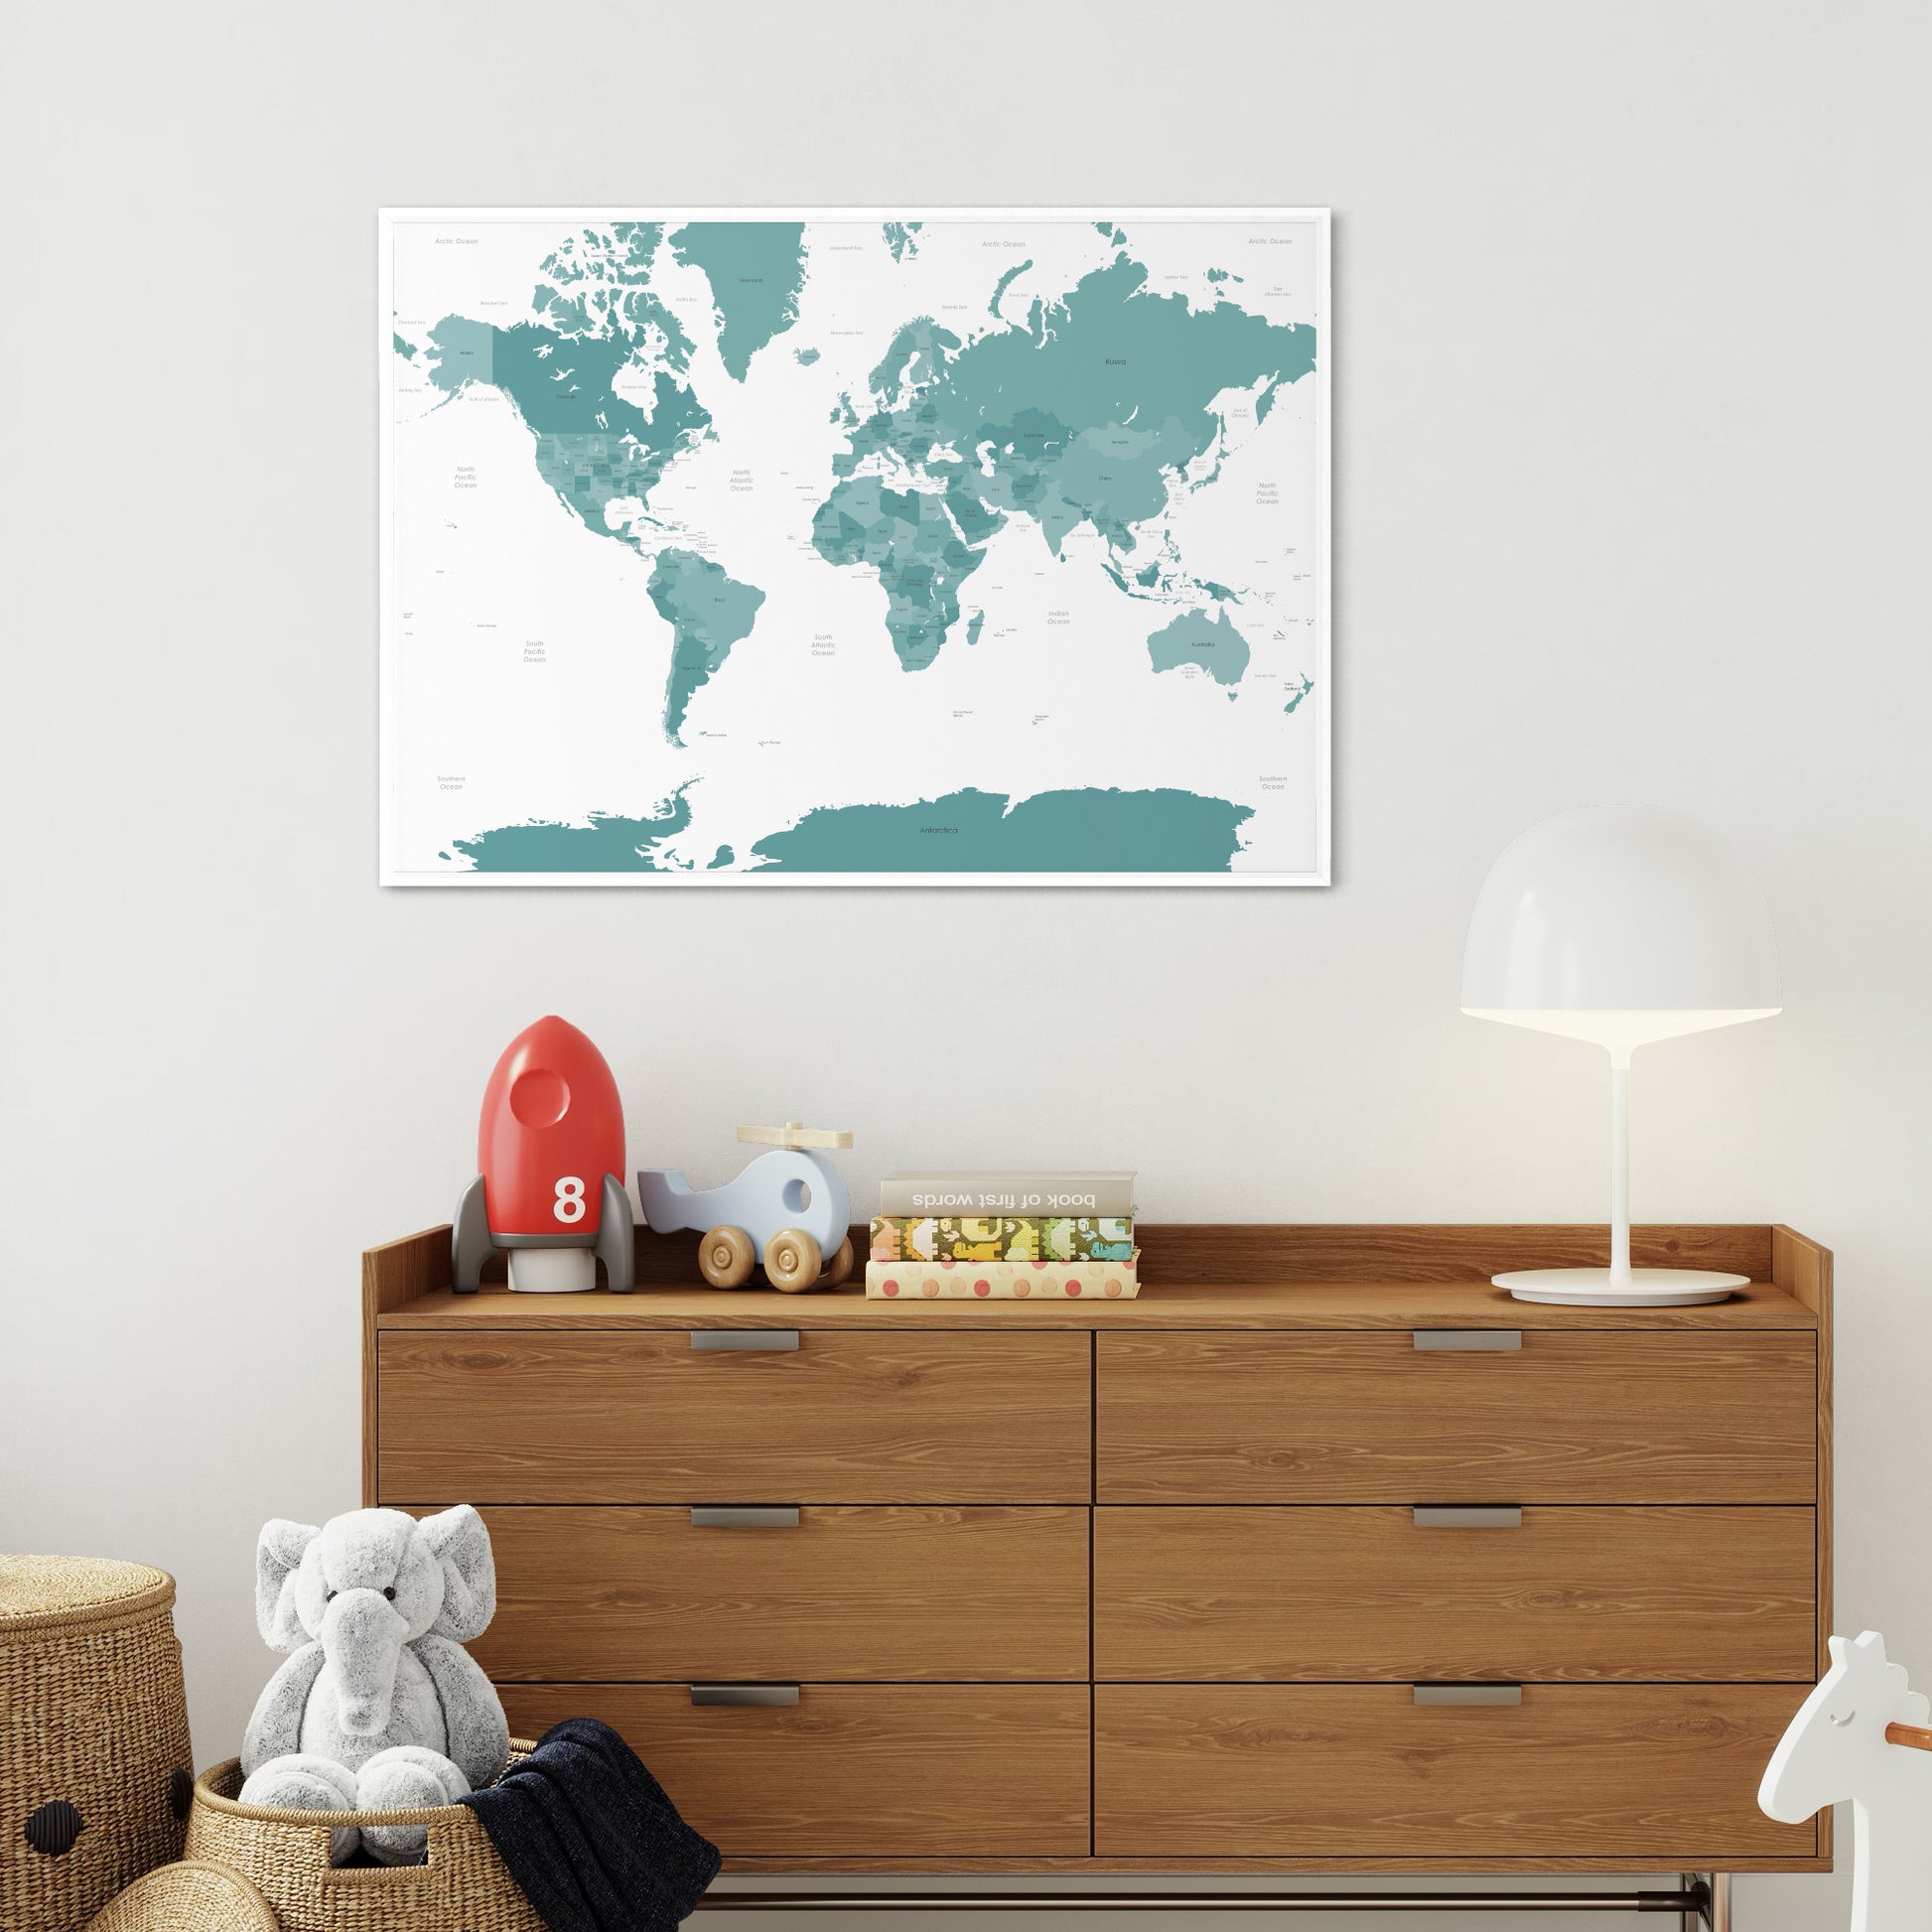 Teal World Map On Nursery Wall Above Chest of Drawers